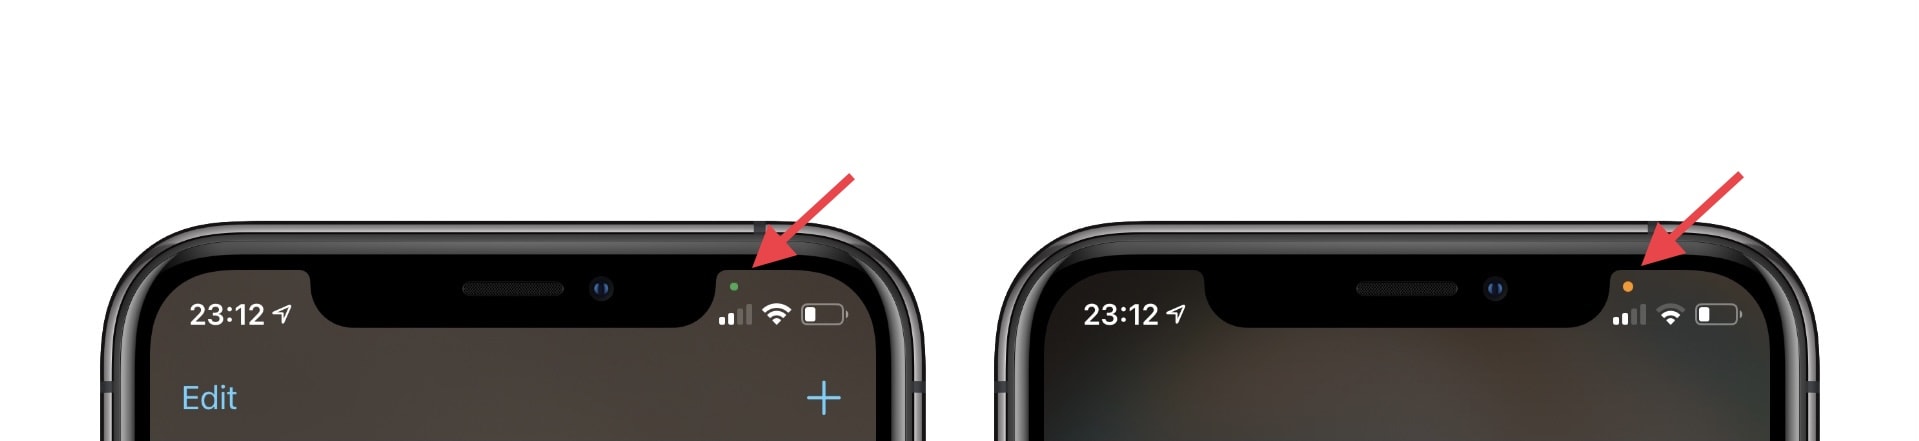 What green and orange dots mean on iPhone and iPad with iOS 14